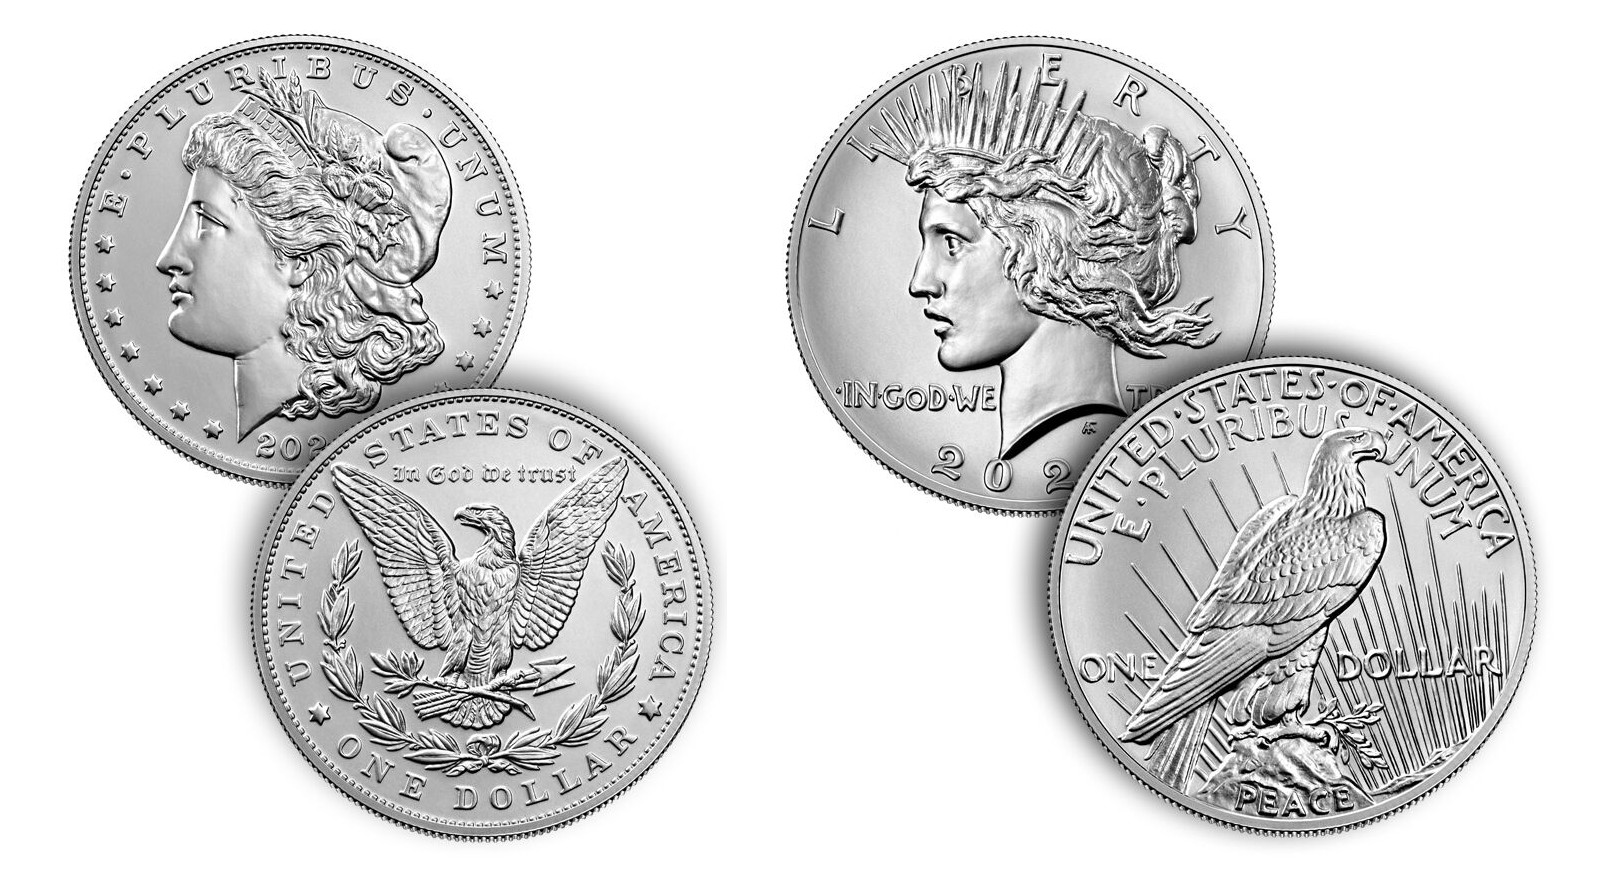 Details emerge for U.S. Mint 2023 Peace Dollar production LCR Coin